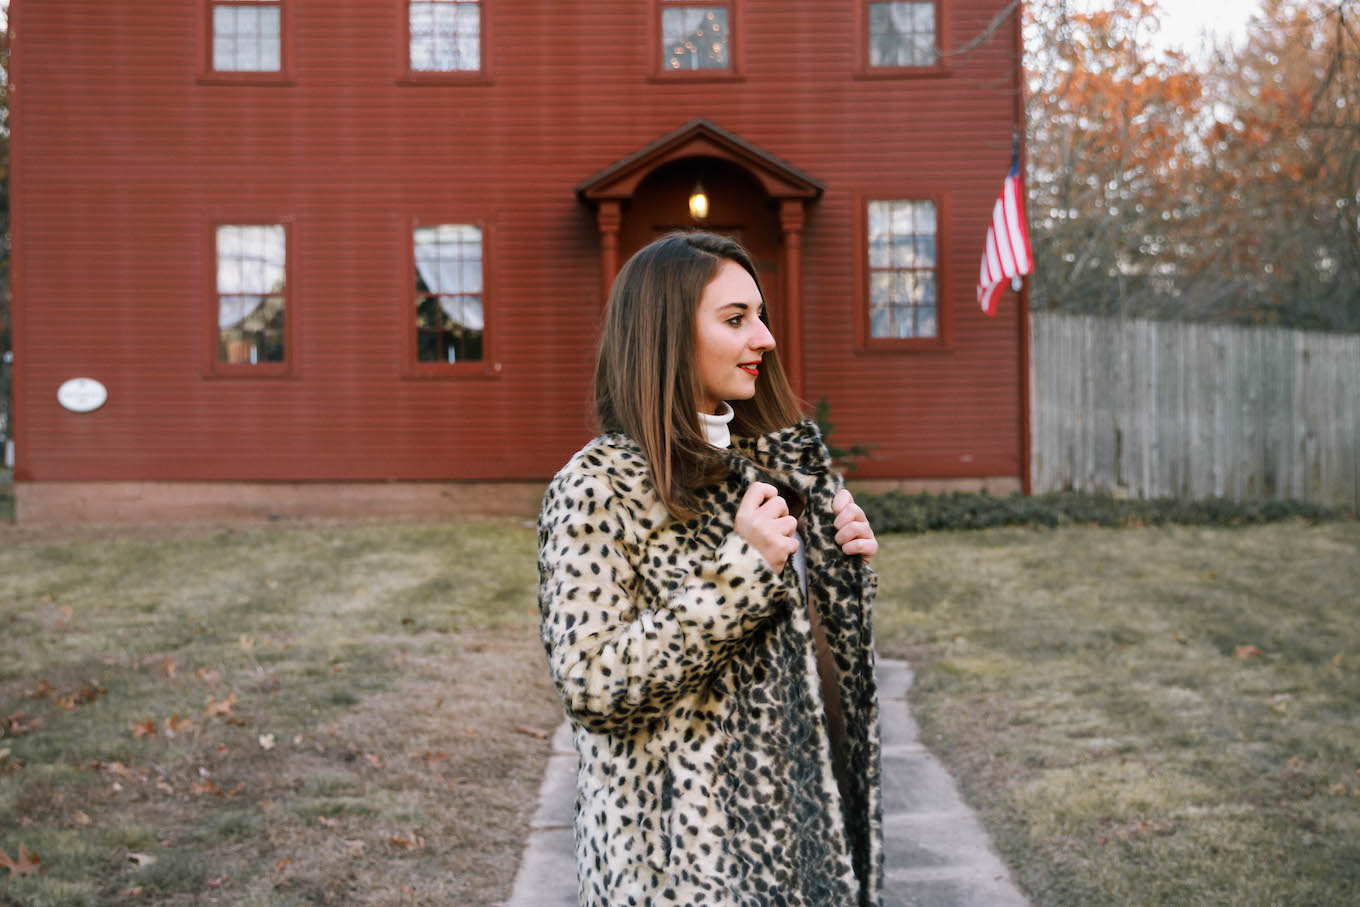 Frosted Window Panes and Leopard Coats | The Coastal Confidence by Aubrey Yandow